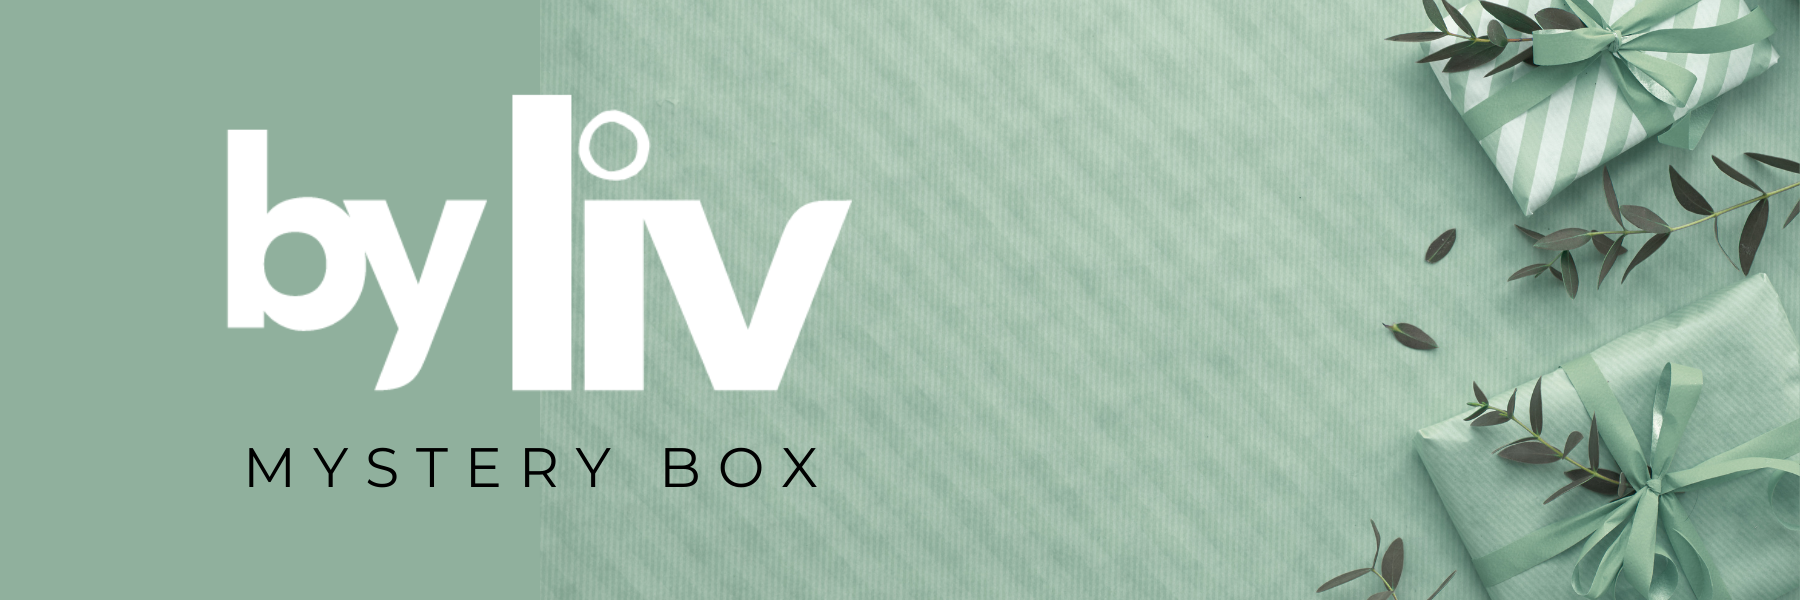 The By Liv Box - Yearly MYSTERY subscription box.